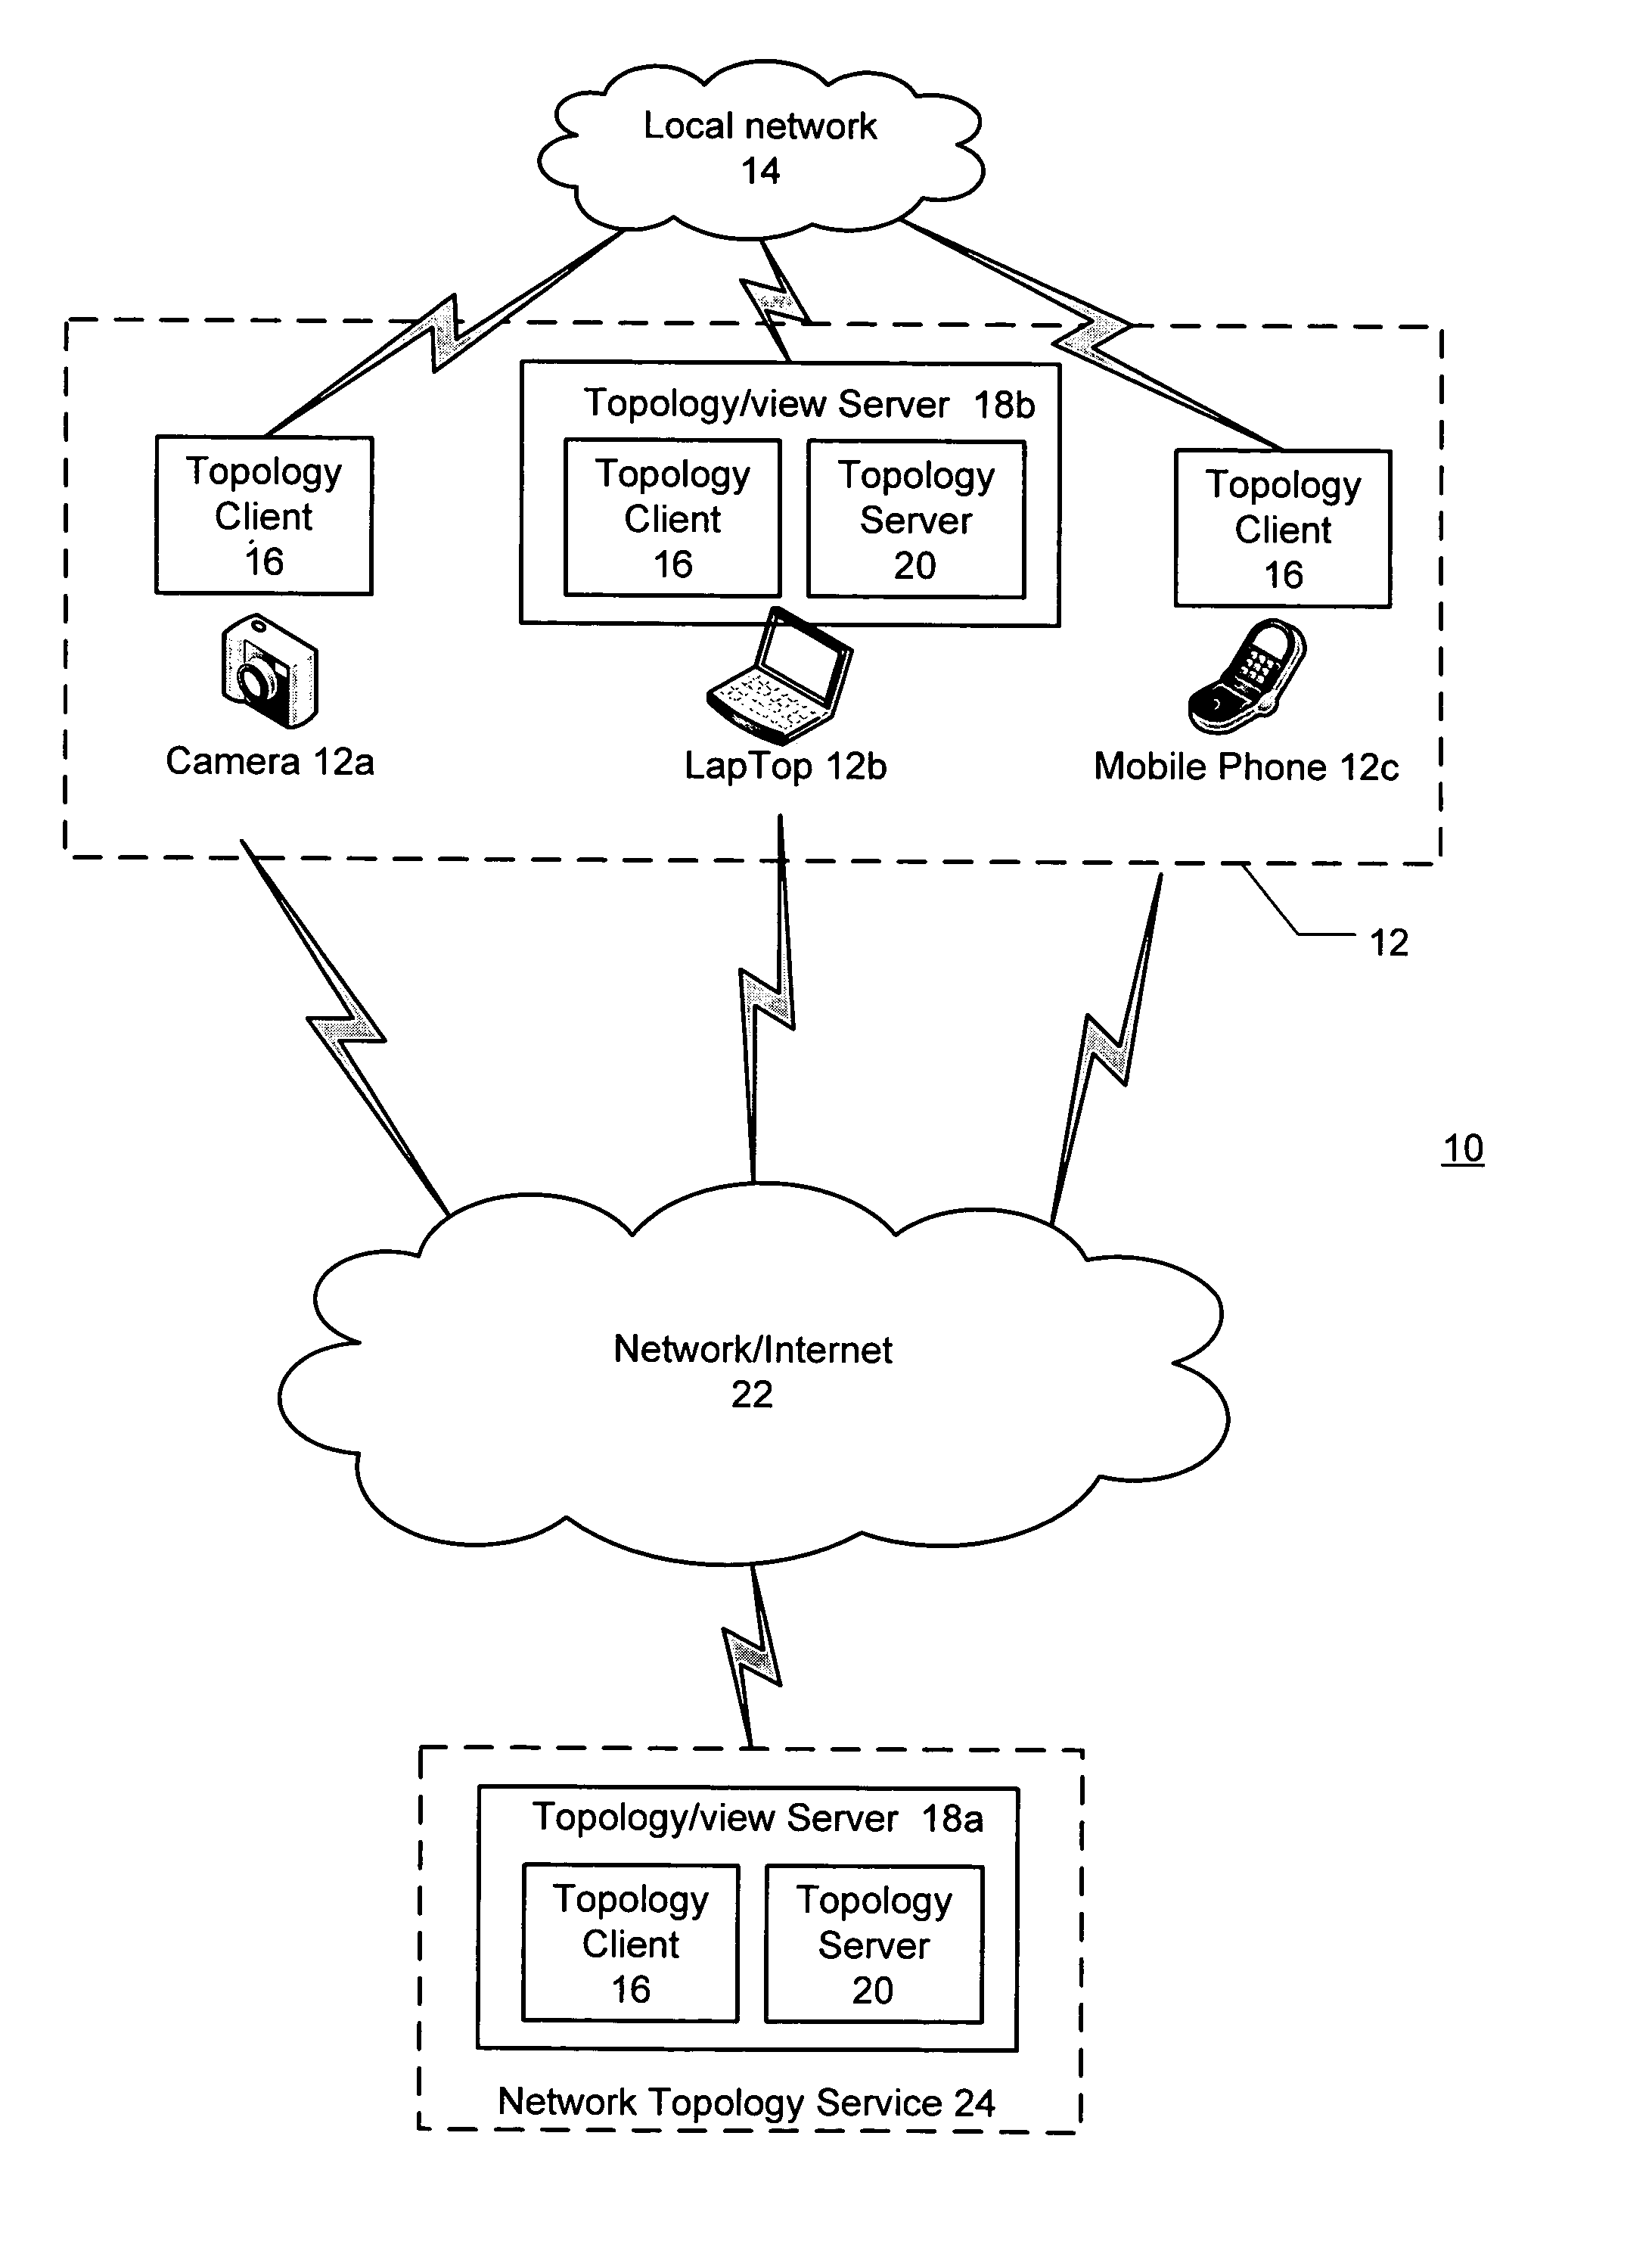 Processing operations associated with resources on a local network